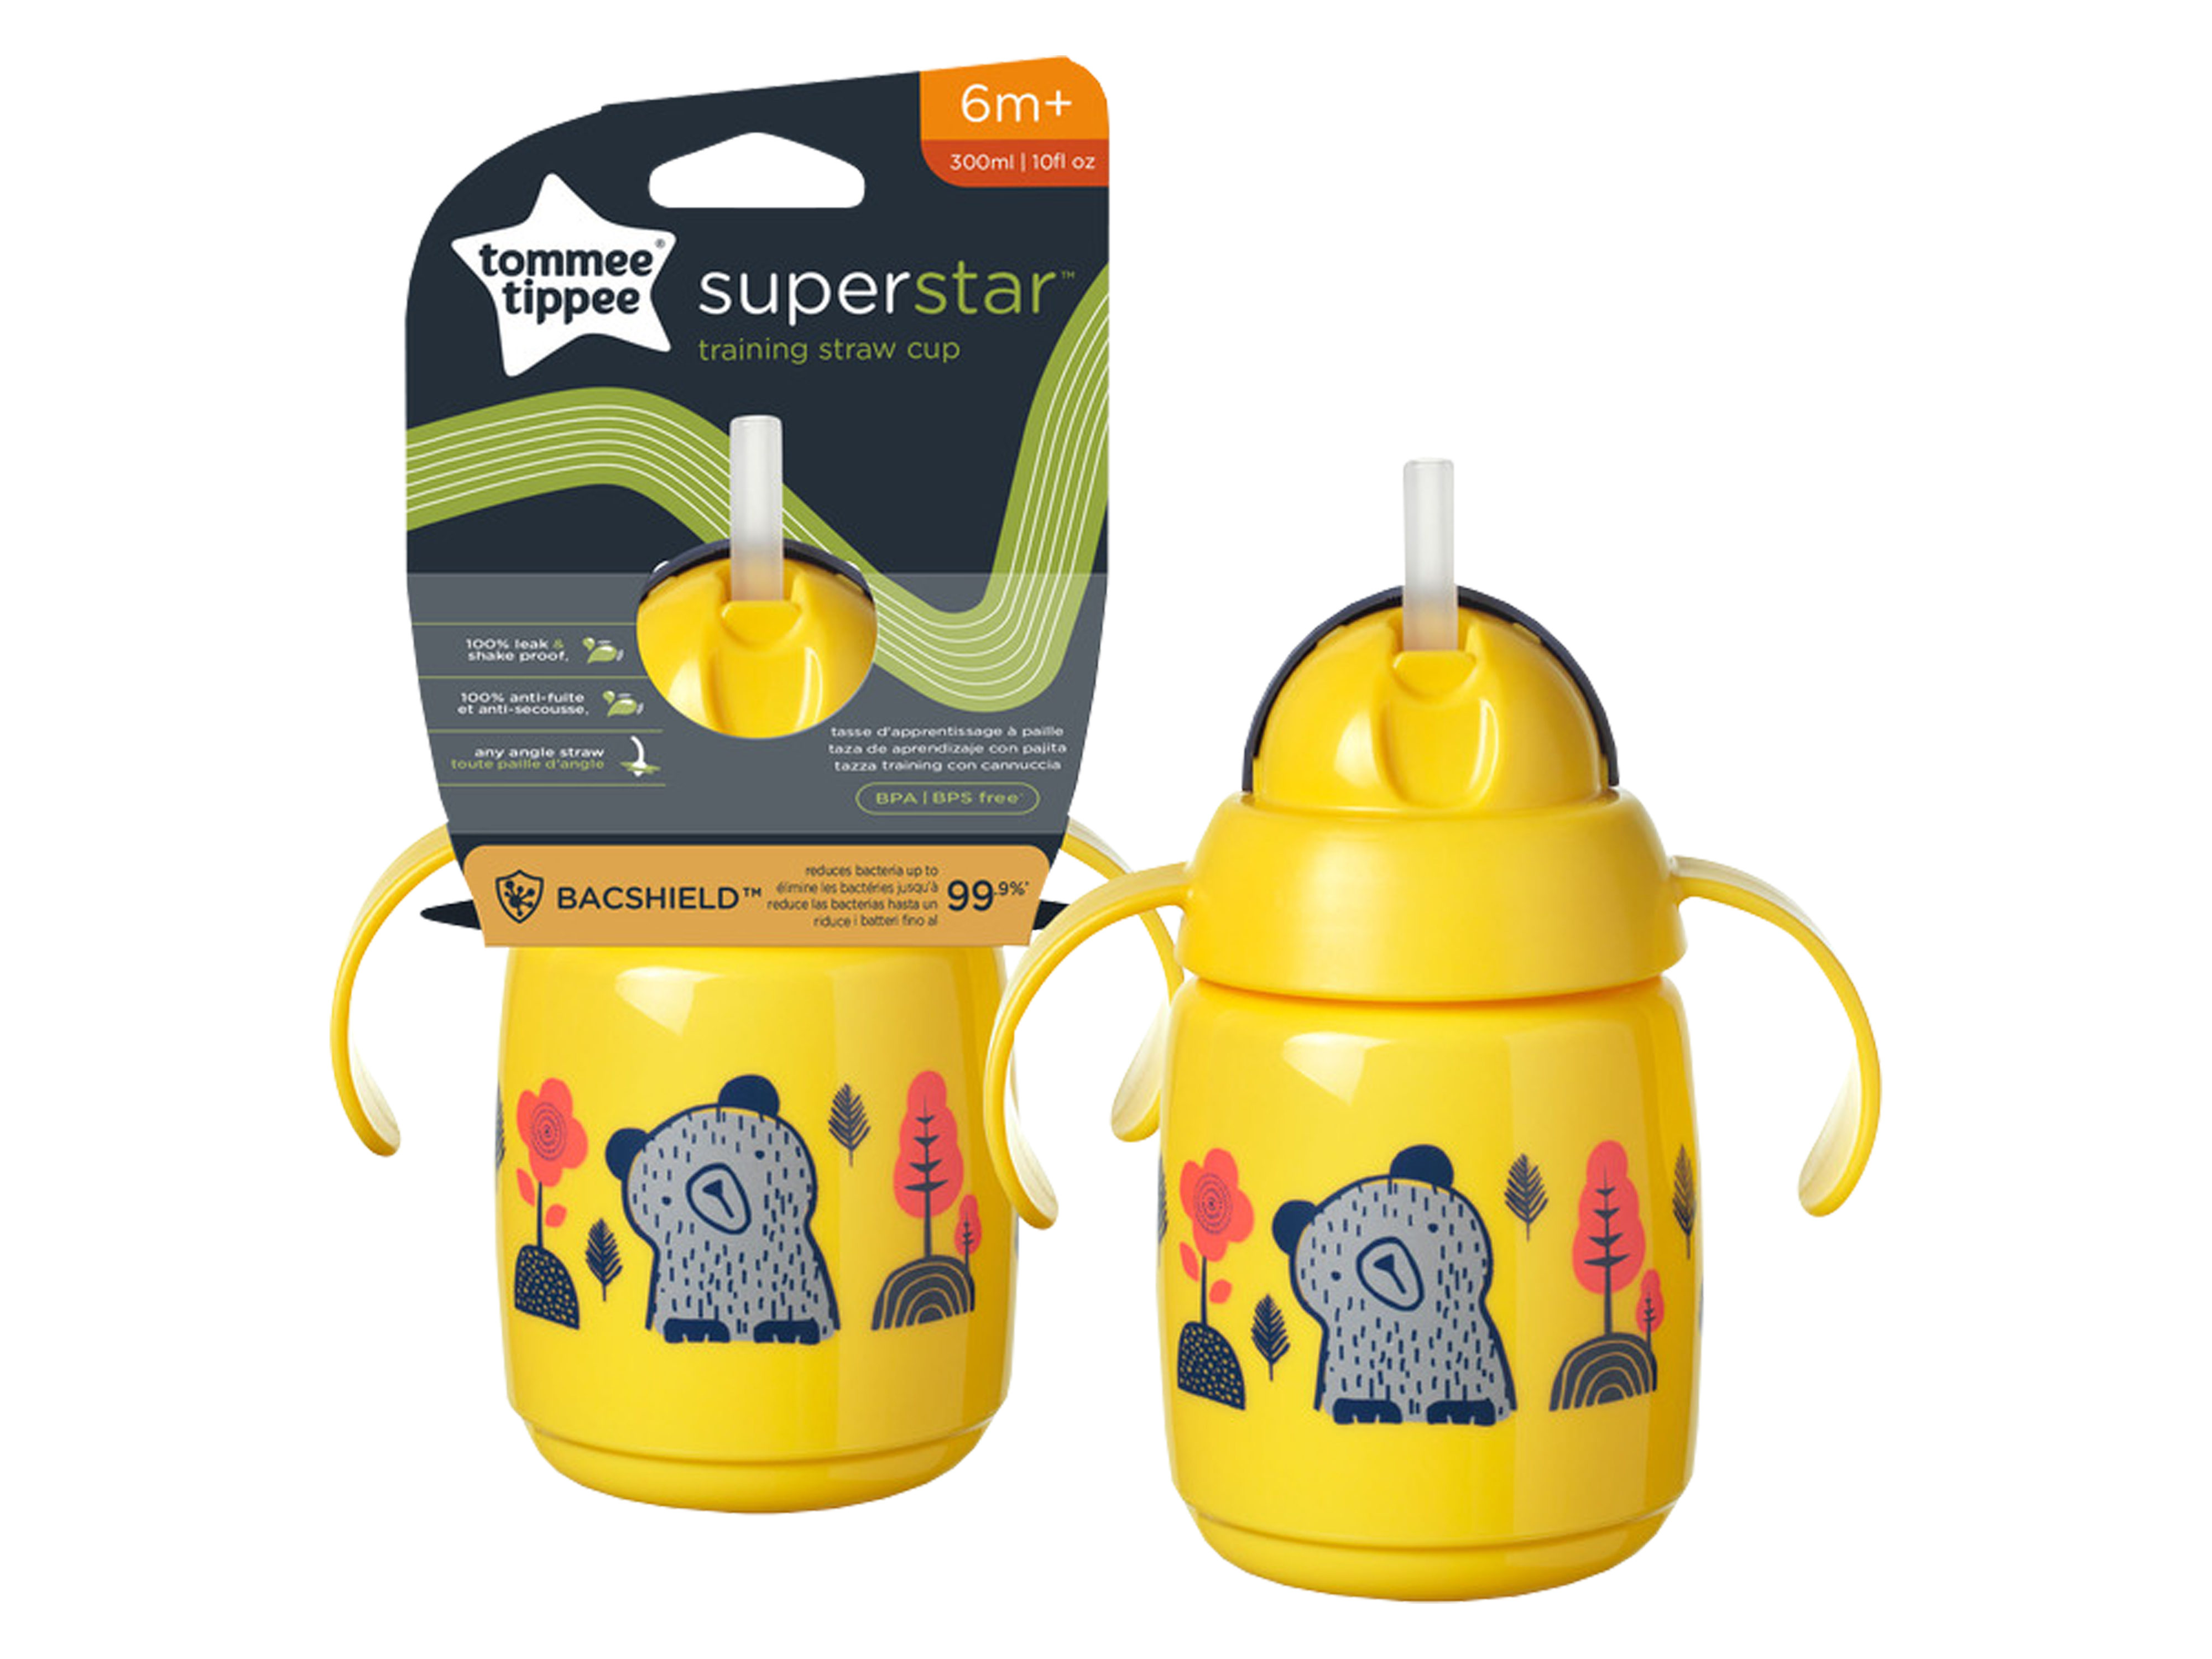 Tommee Tippee Superstar Straw Cup 6md+, Gul, 1 stk.